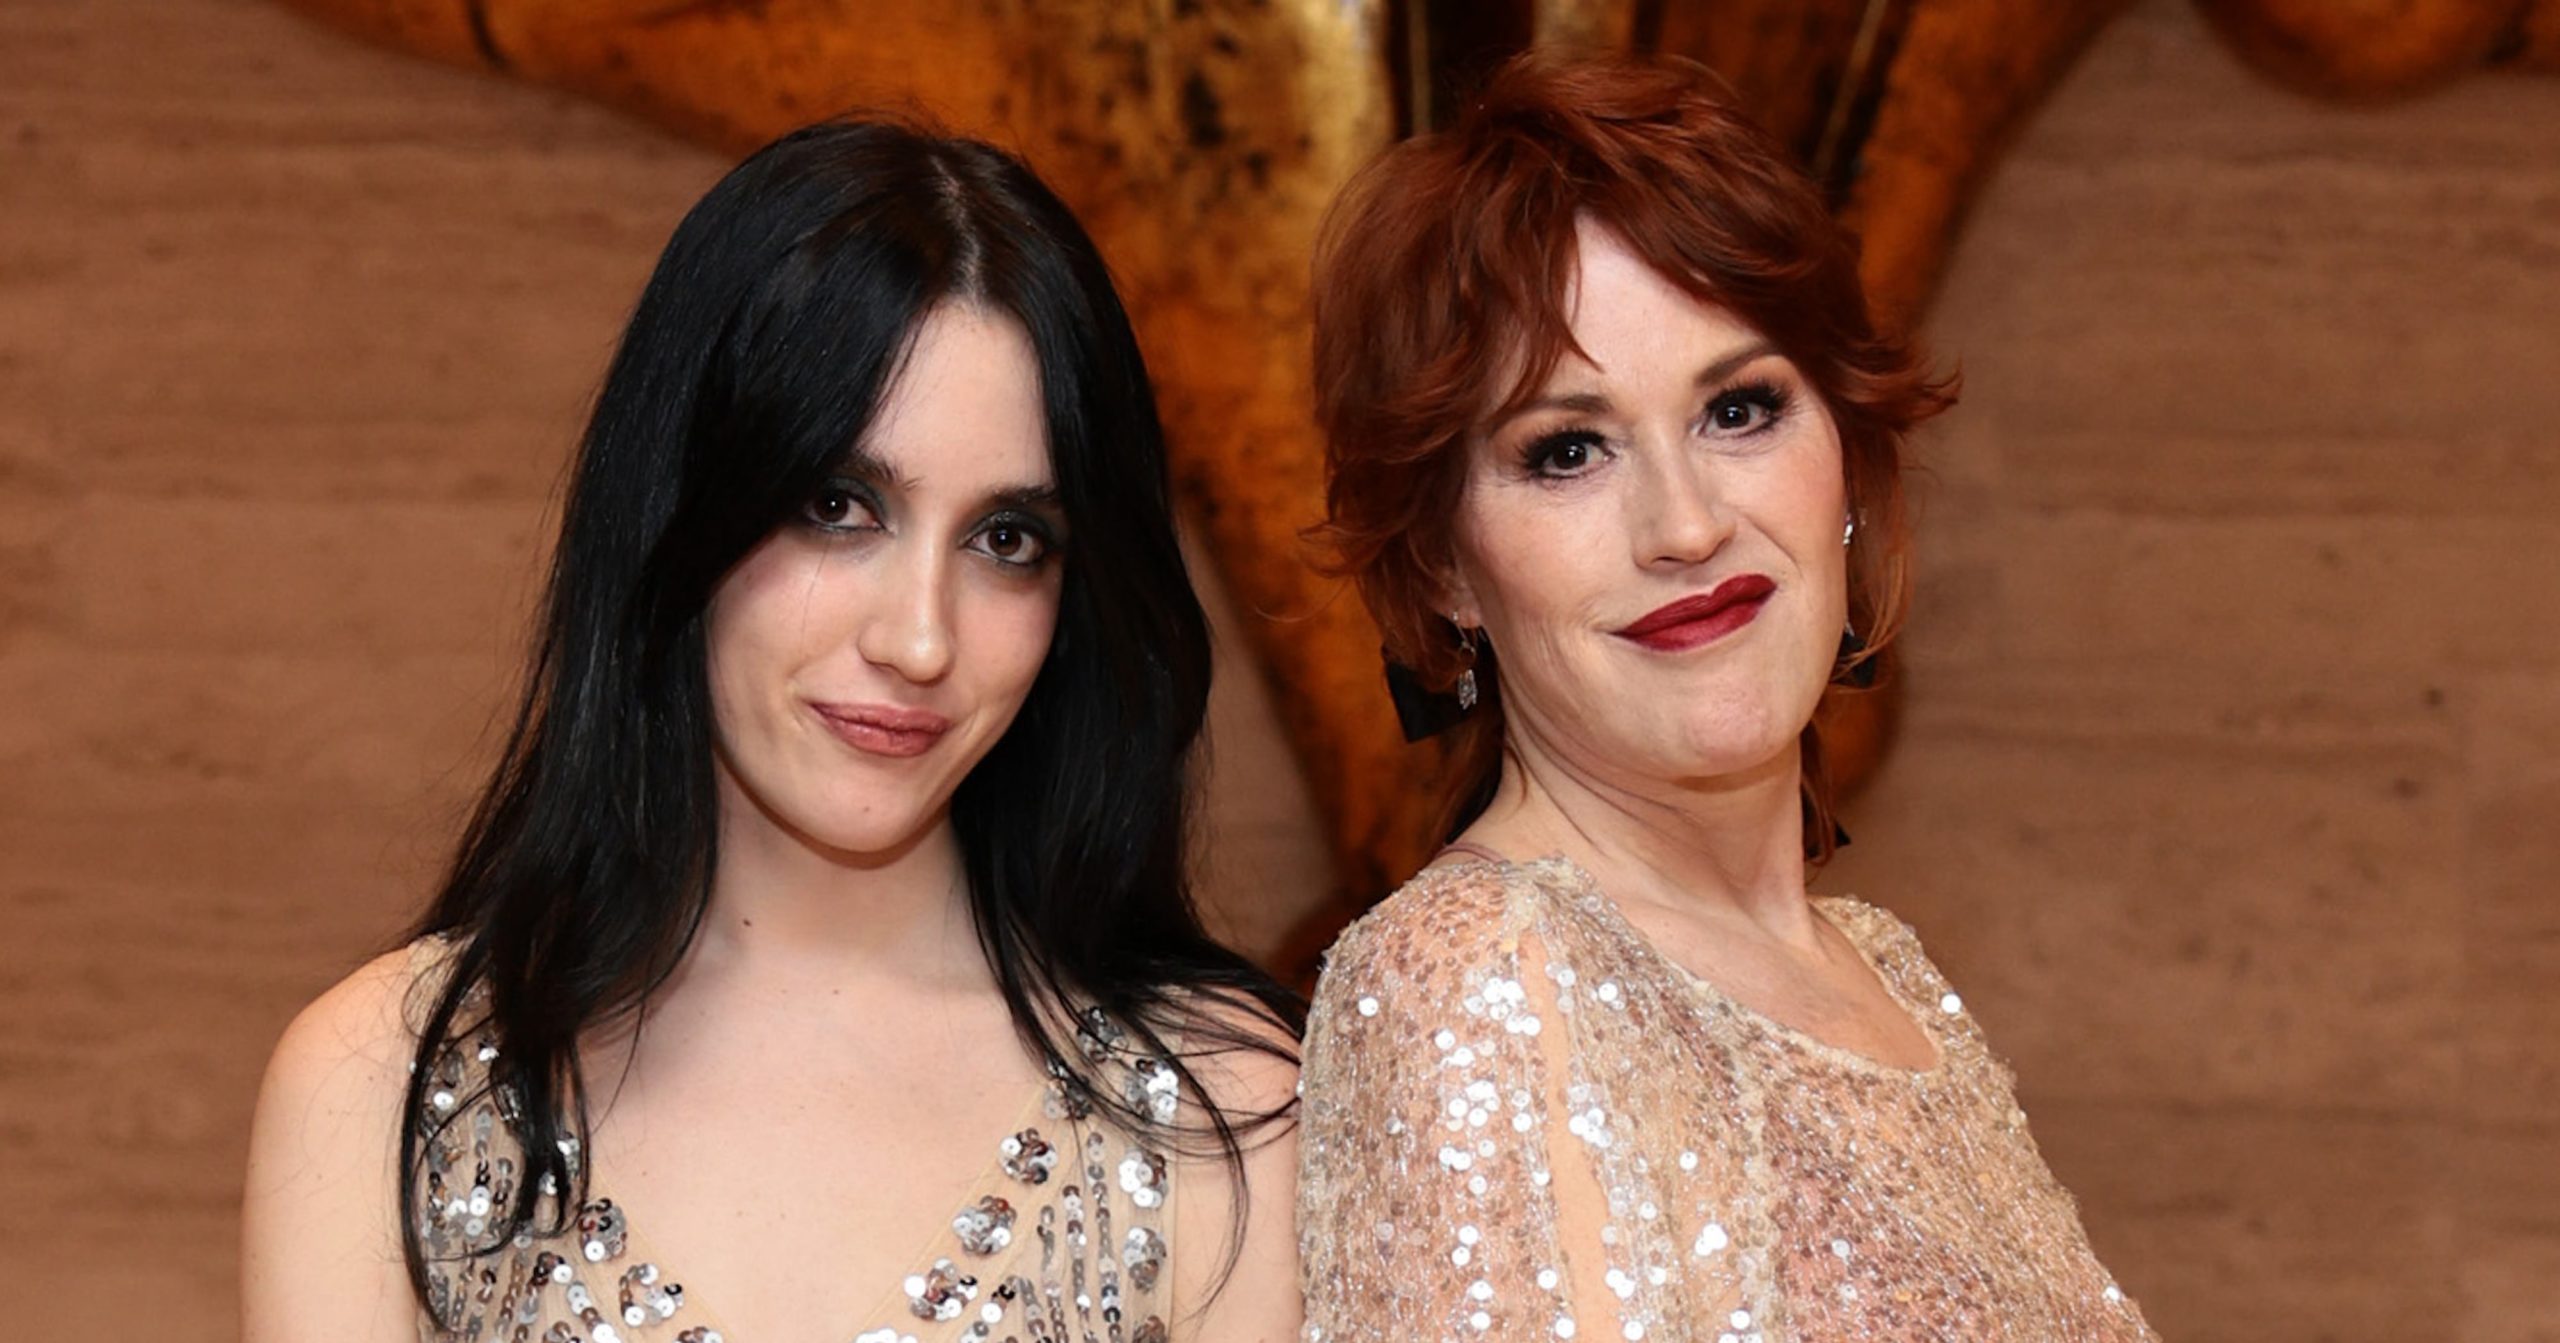 Molly Ringwald and Daughter Mathilda Get Glammed Up For a Rare Red Carpet Outing